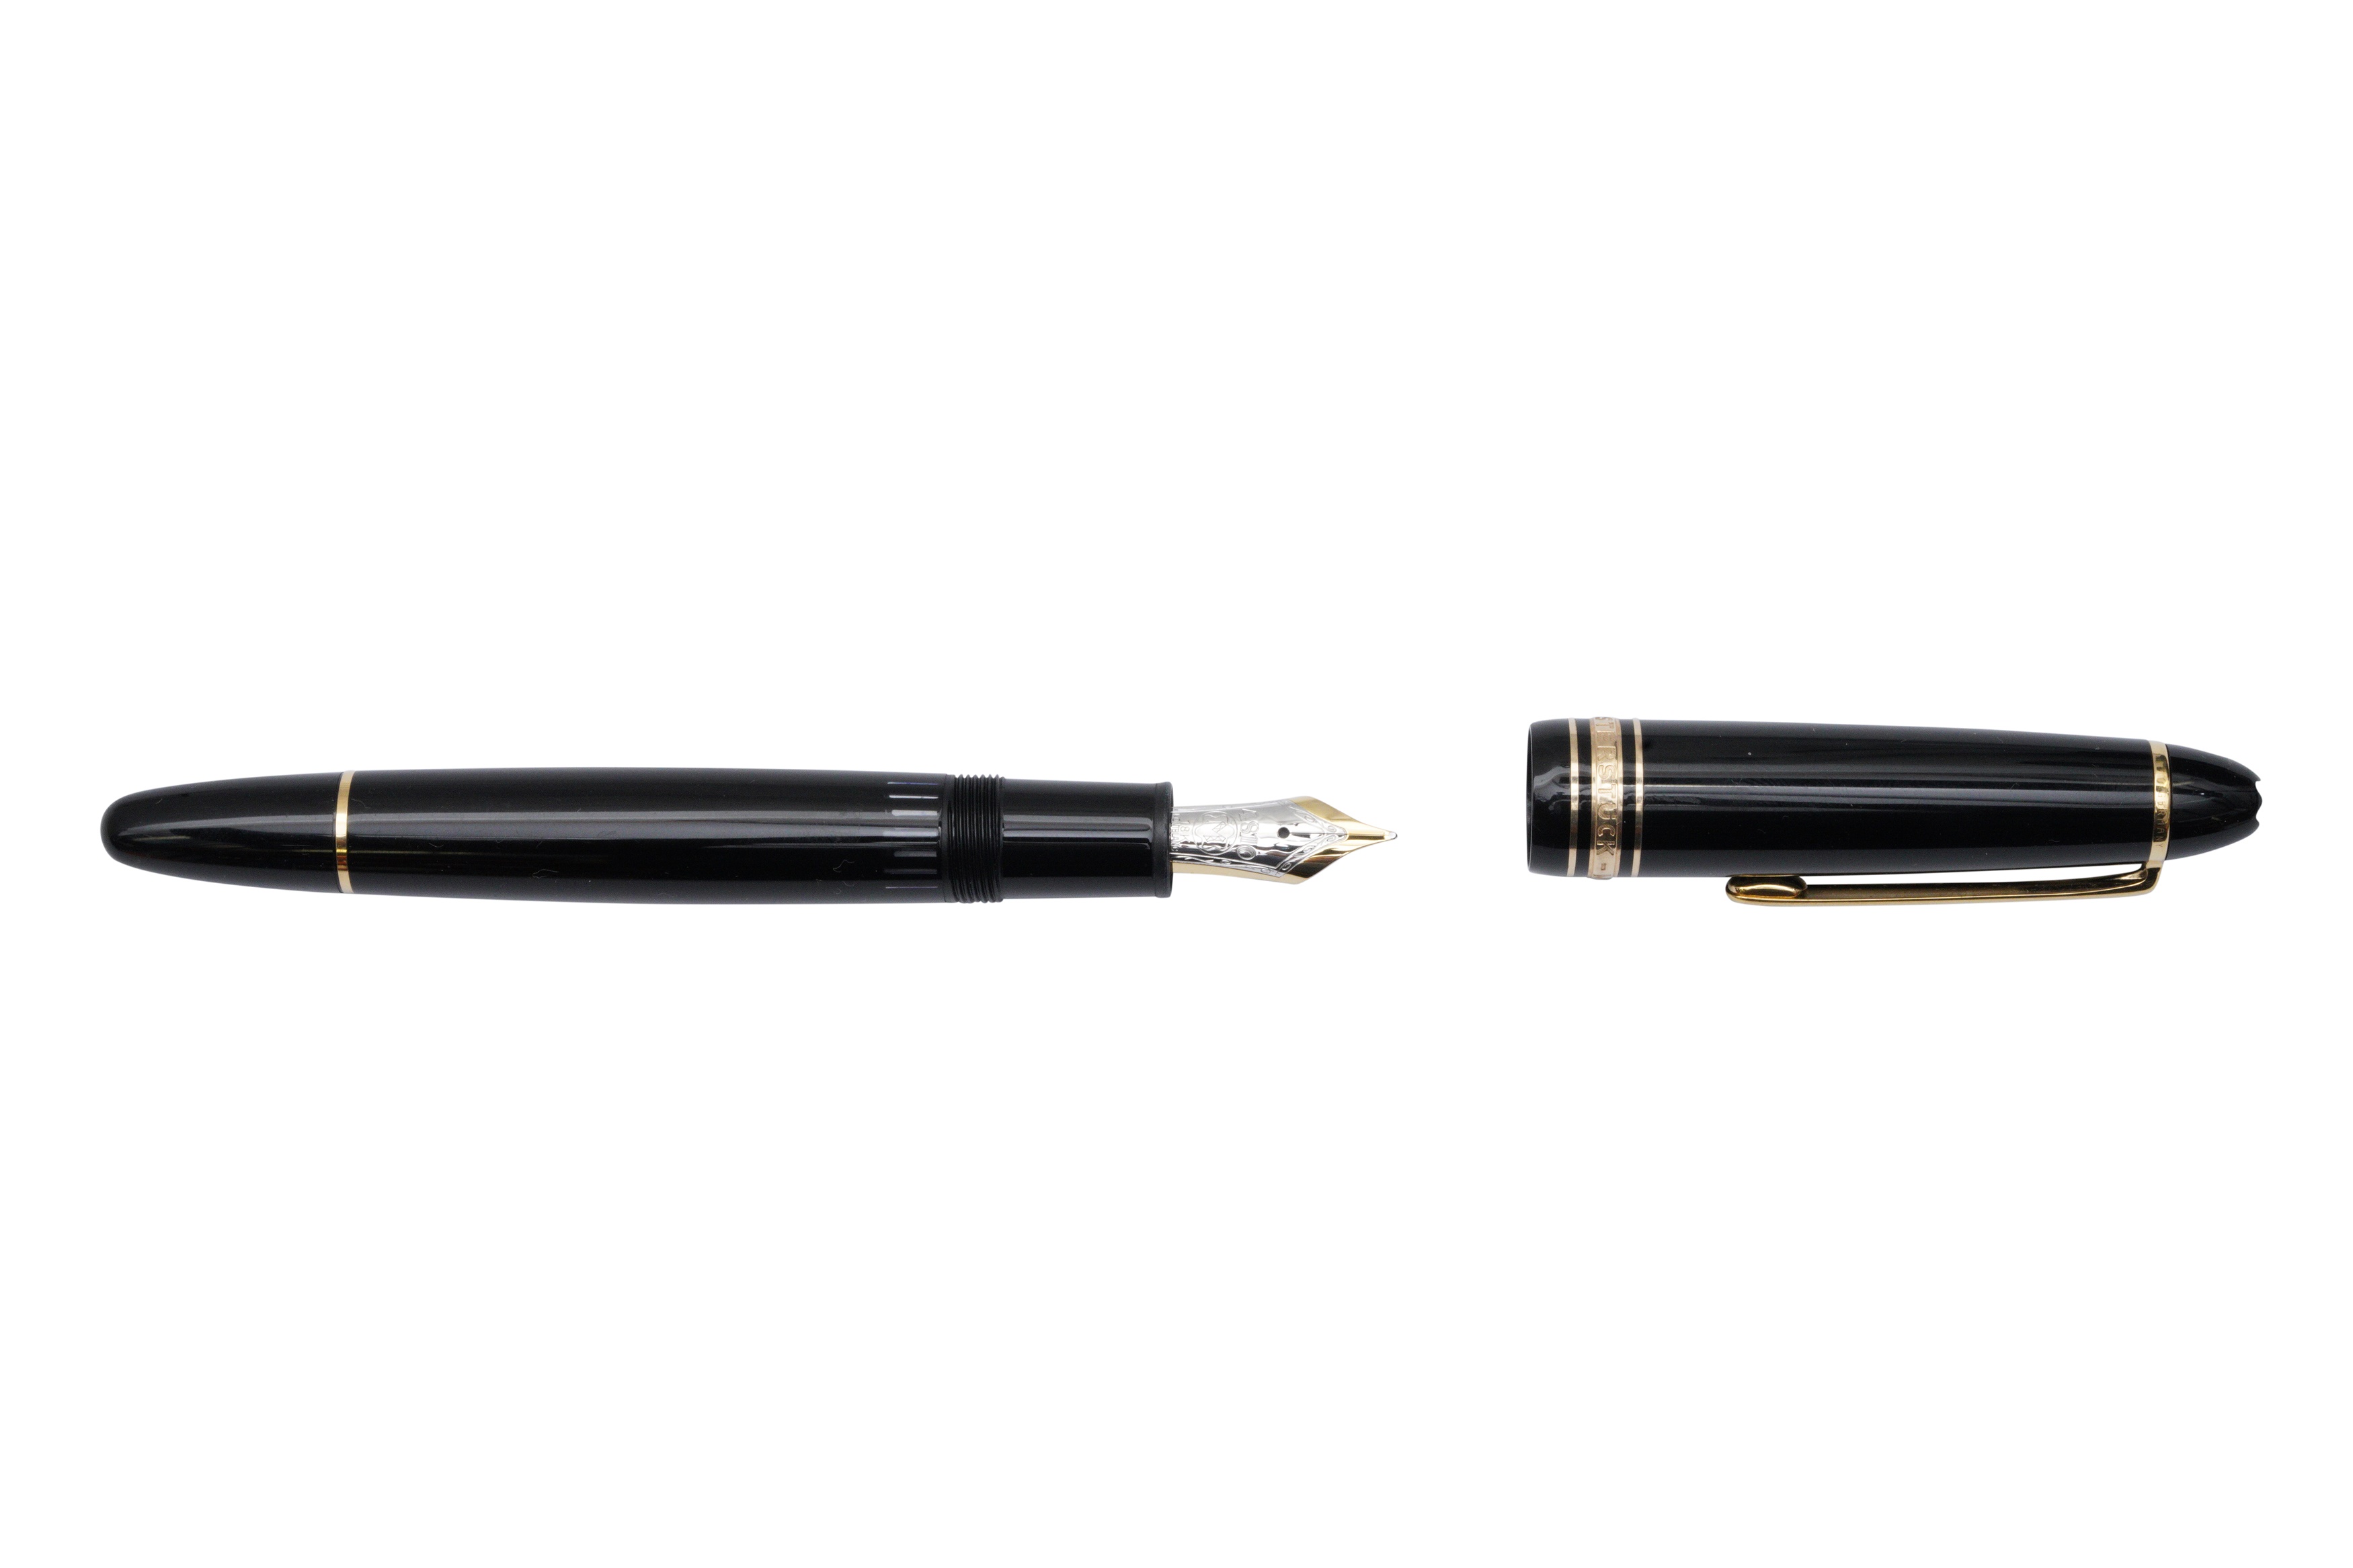 A MONTBLANC MEISTERSTUCK LE GRAND FOUNTAIN PEN - Image 2 of 3